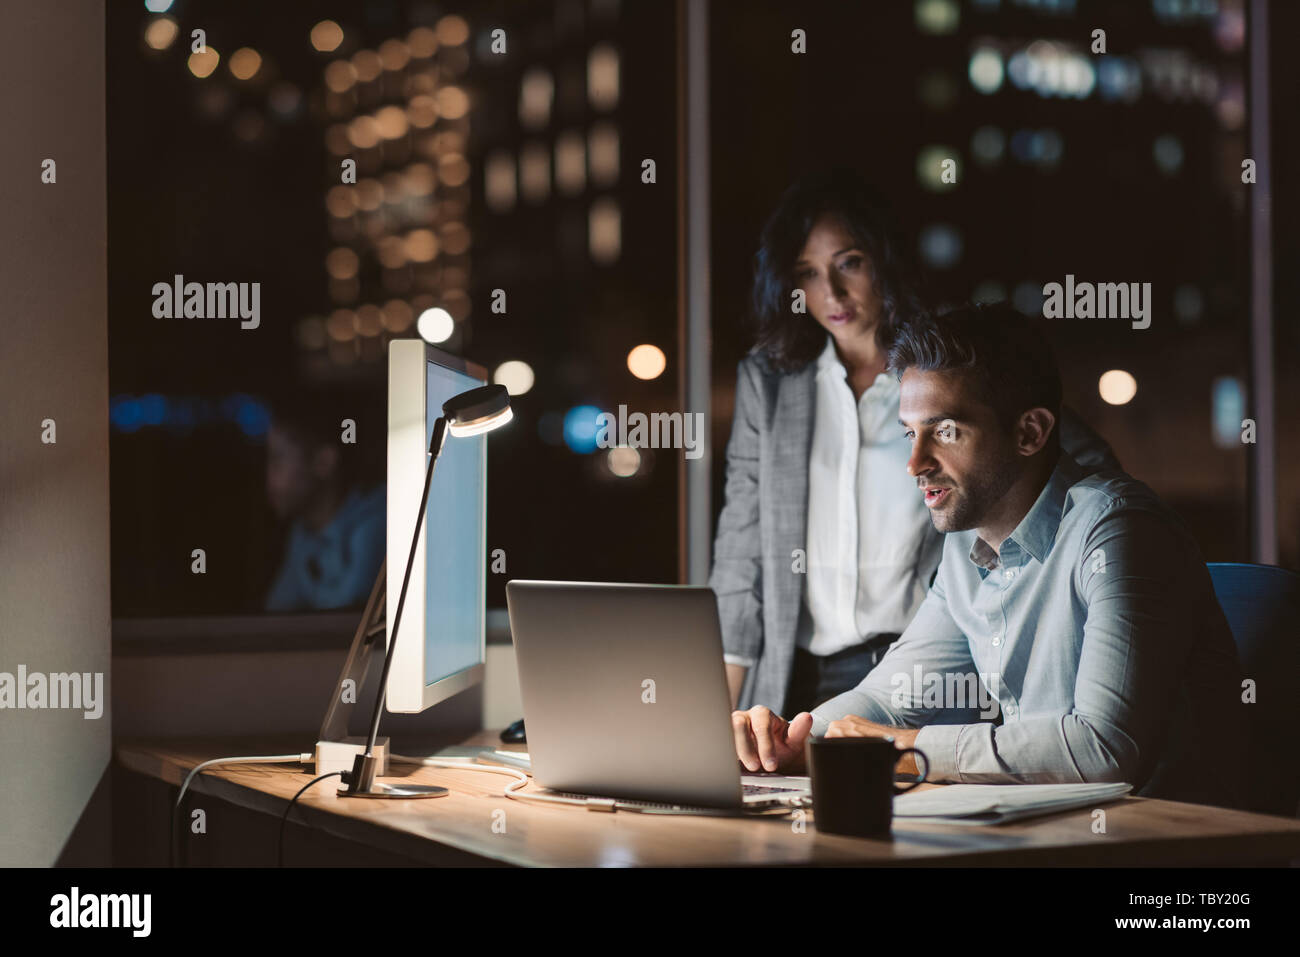 Two focused colleagues working in an office late at night Stock Photo